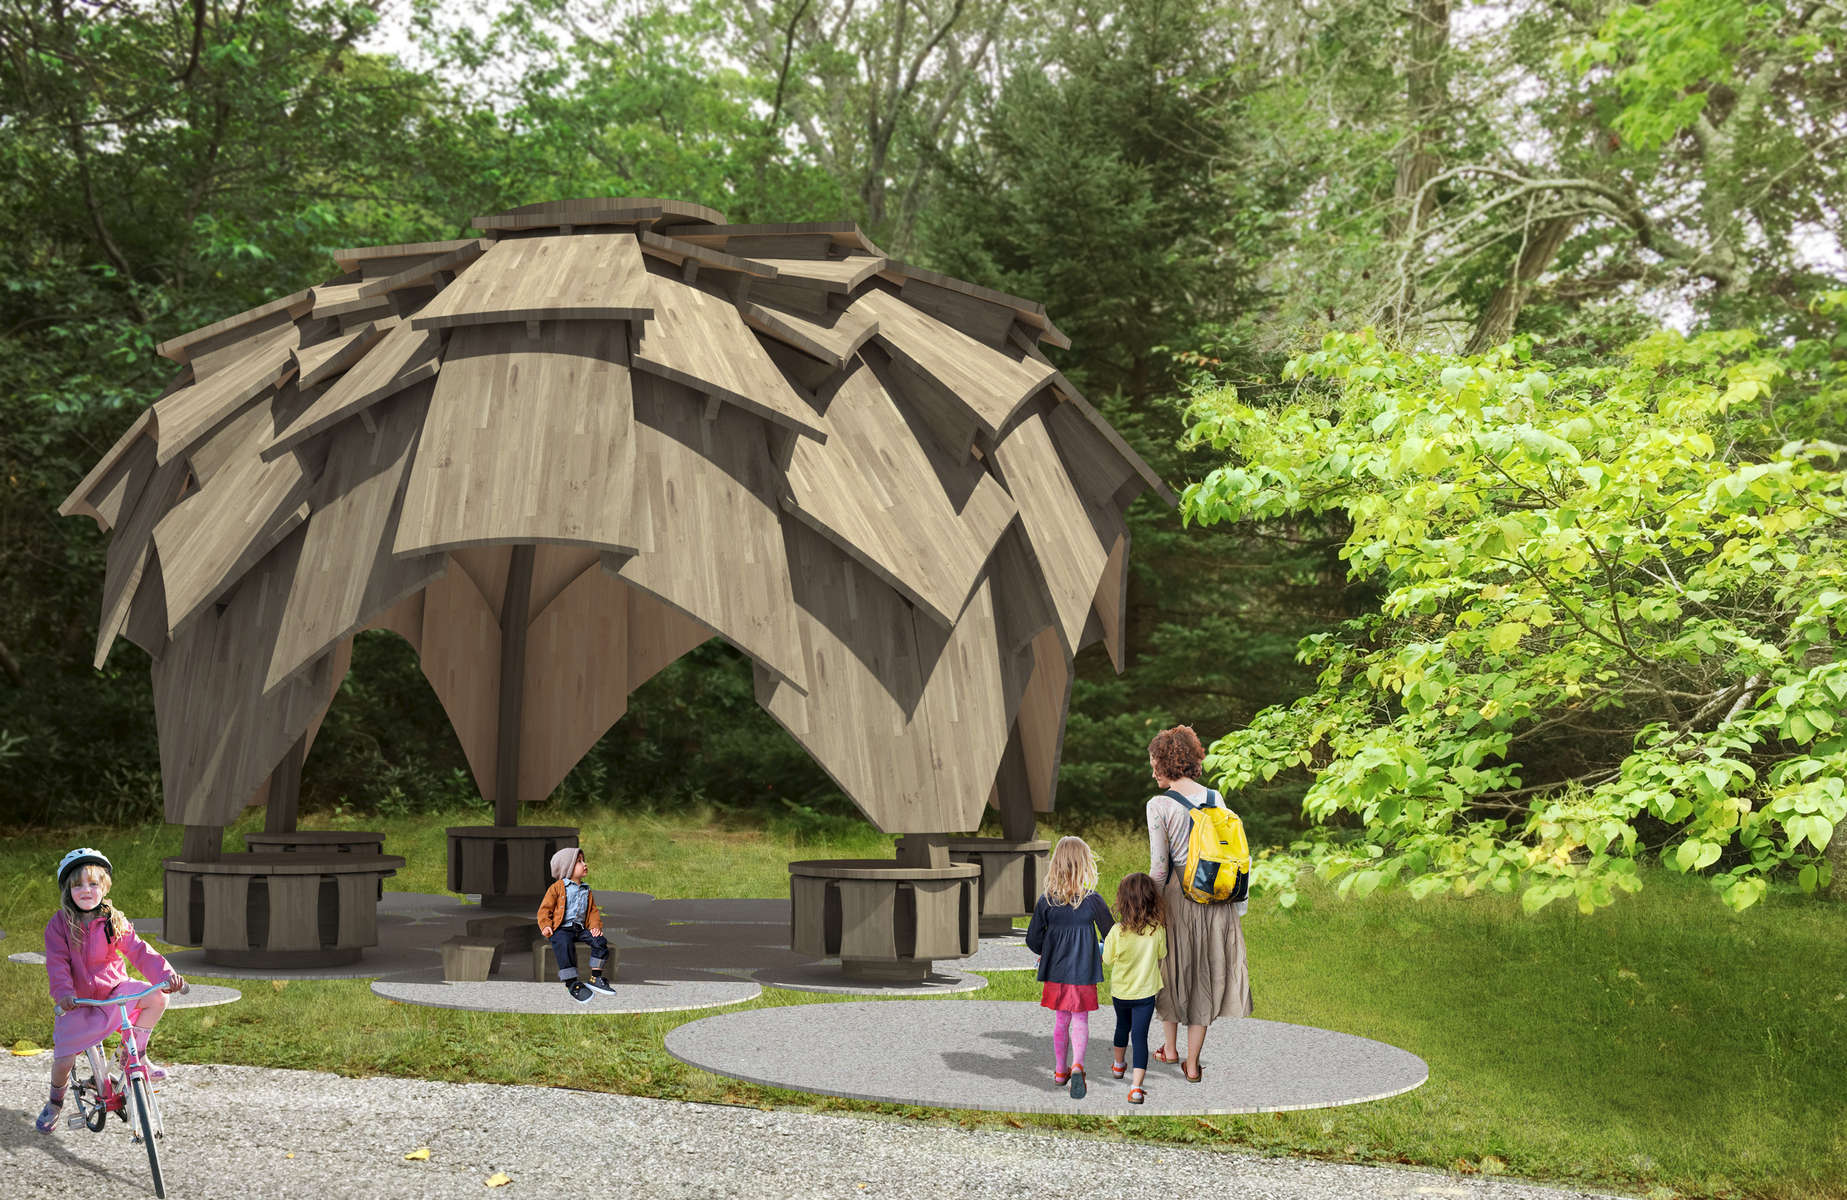 IKD has been hired to design an education pavillion at the Heritage Museum. Just as pine cones fallen from the trees through out the Heritage grounds spread their seeds to encourage more growth, the Heritage and their deep commitment to education will use the pine cone inspired educational structures to promote growth through the seeds of knowledge. Inspired by both pine cone structures and vernacular cape cod shingle construction throughout the region, the pavilion will utilize a new timber technology called Cross Laminated Timber or CLT to develop massive {quote}cedar structural shingles{quote} that will allow for a whimsical pavilion that merges structure and shingle into a single element.